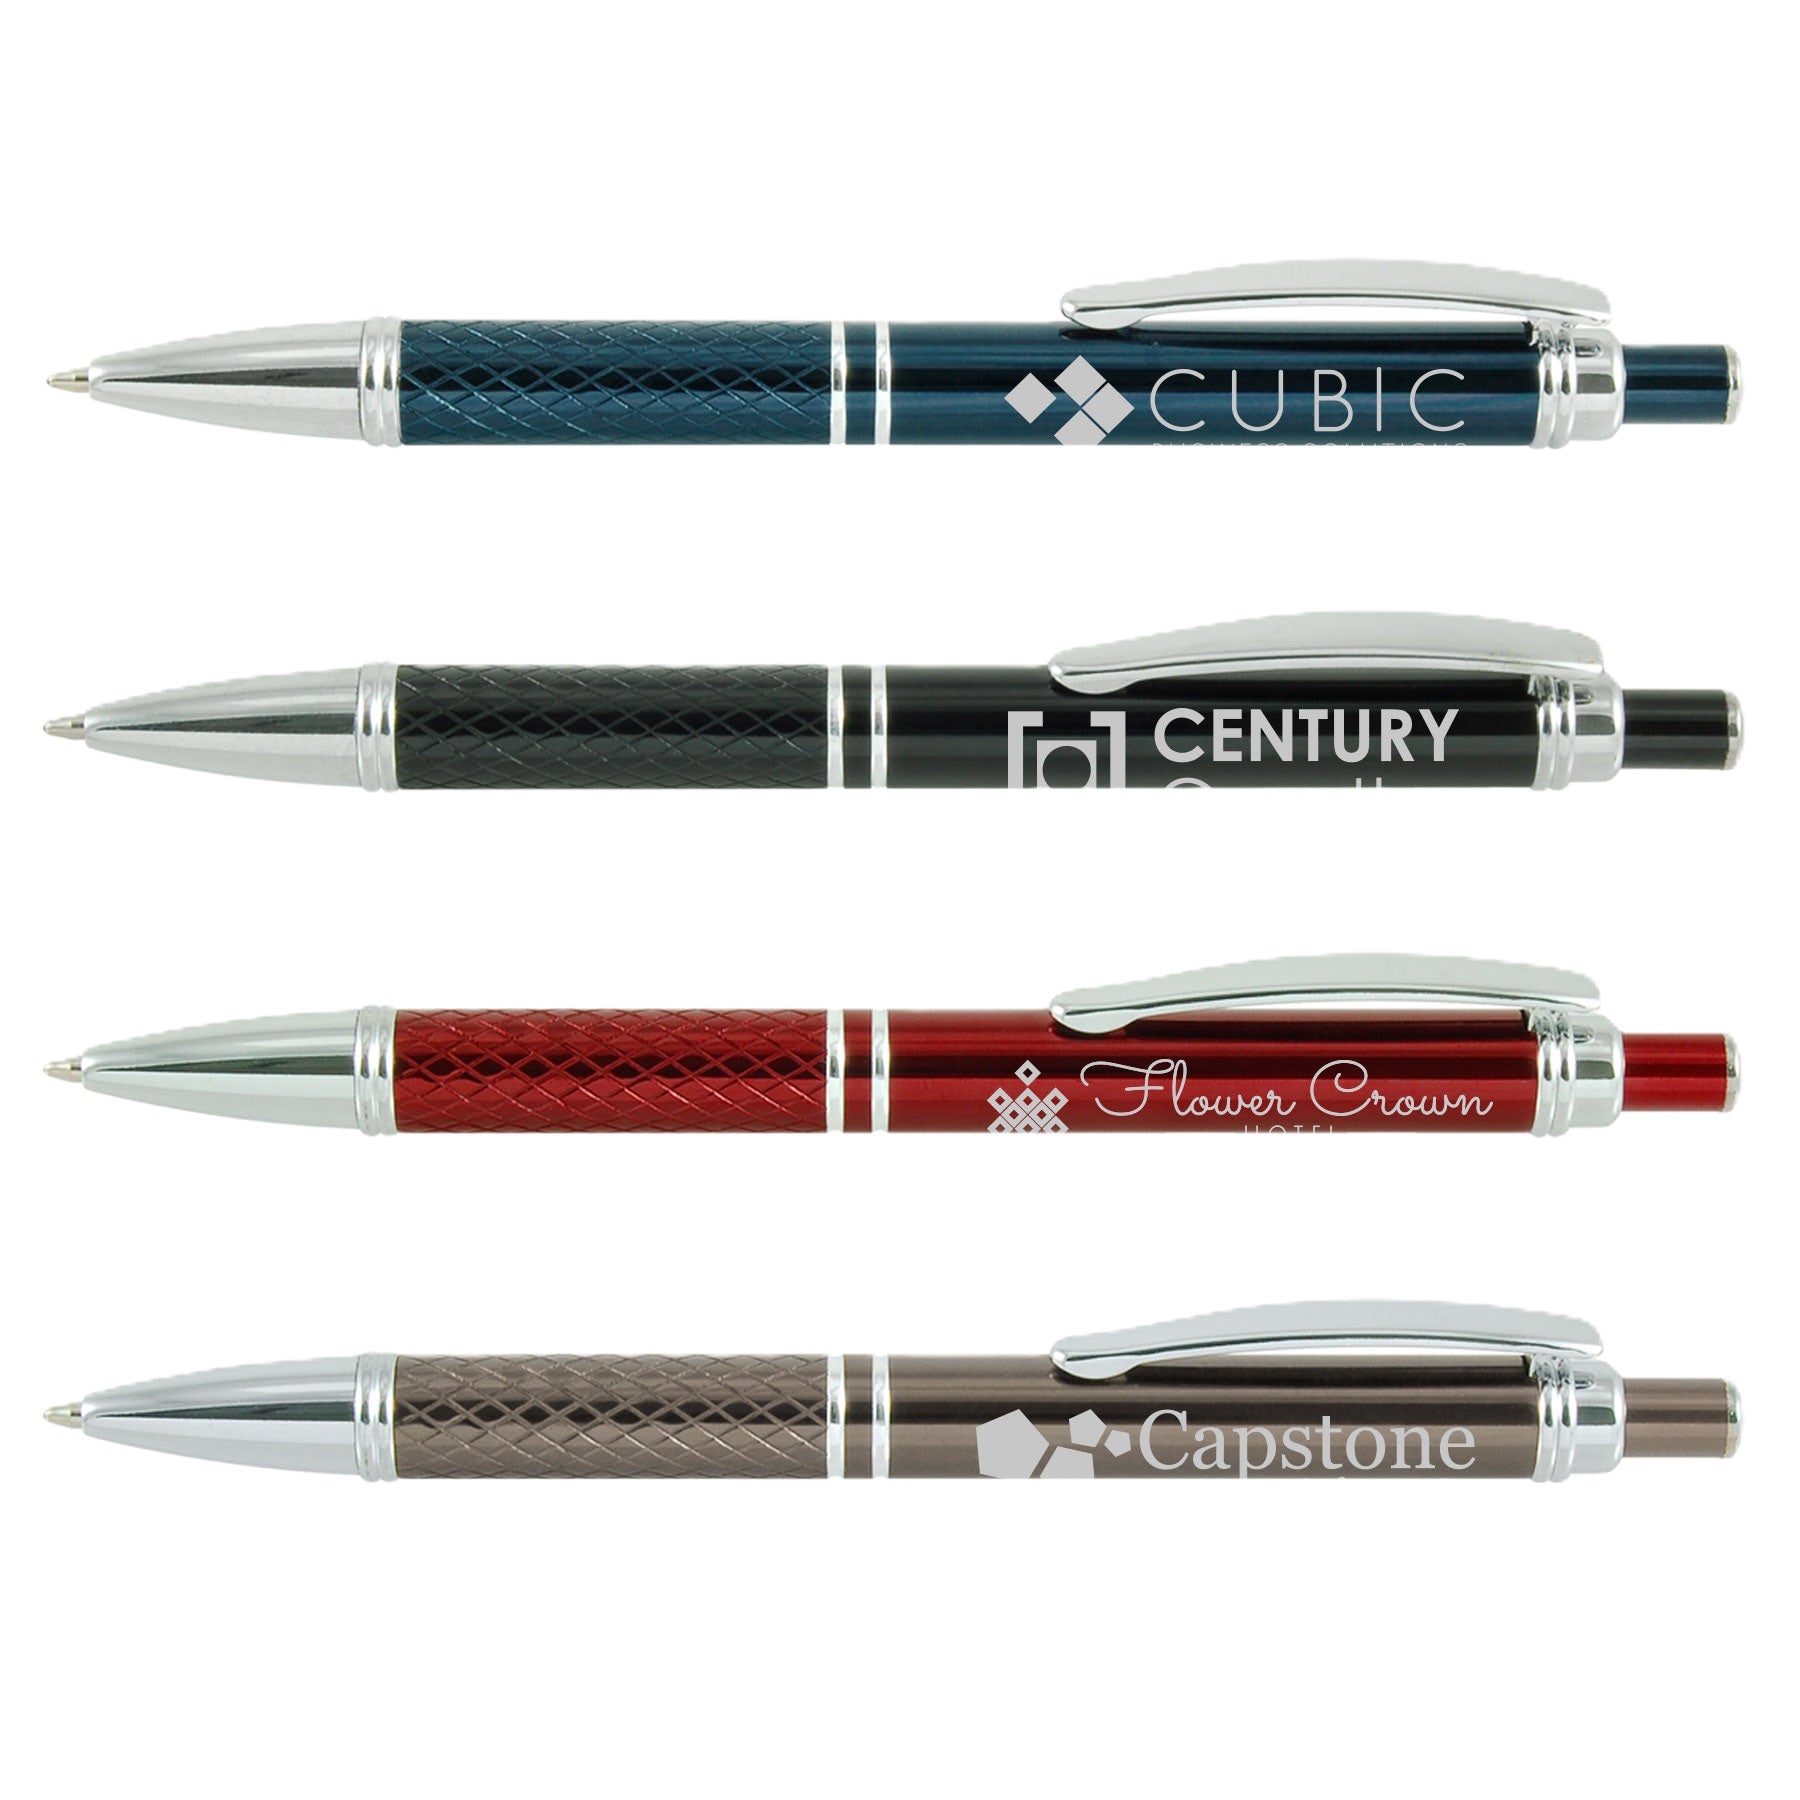 engraved business pens textured grip